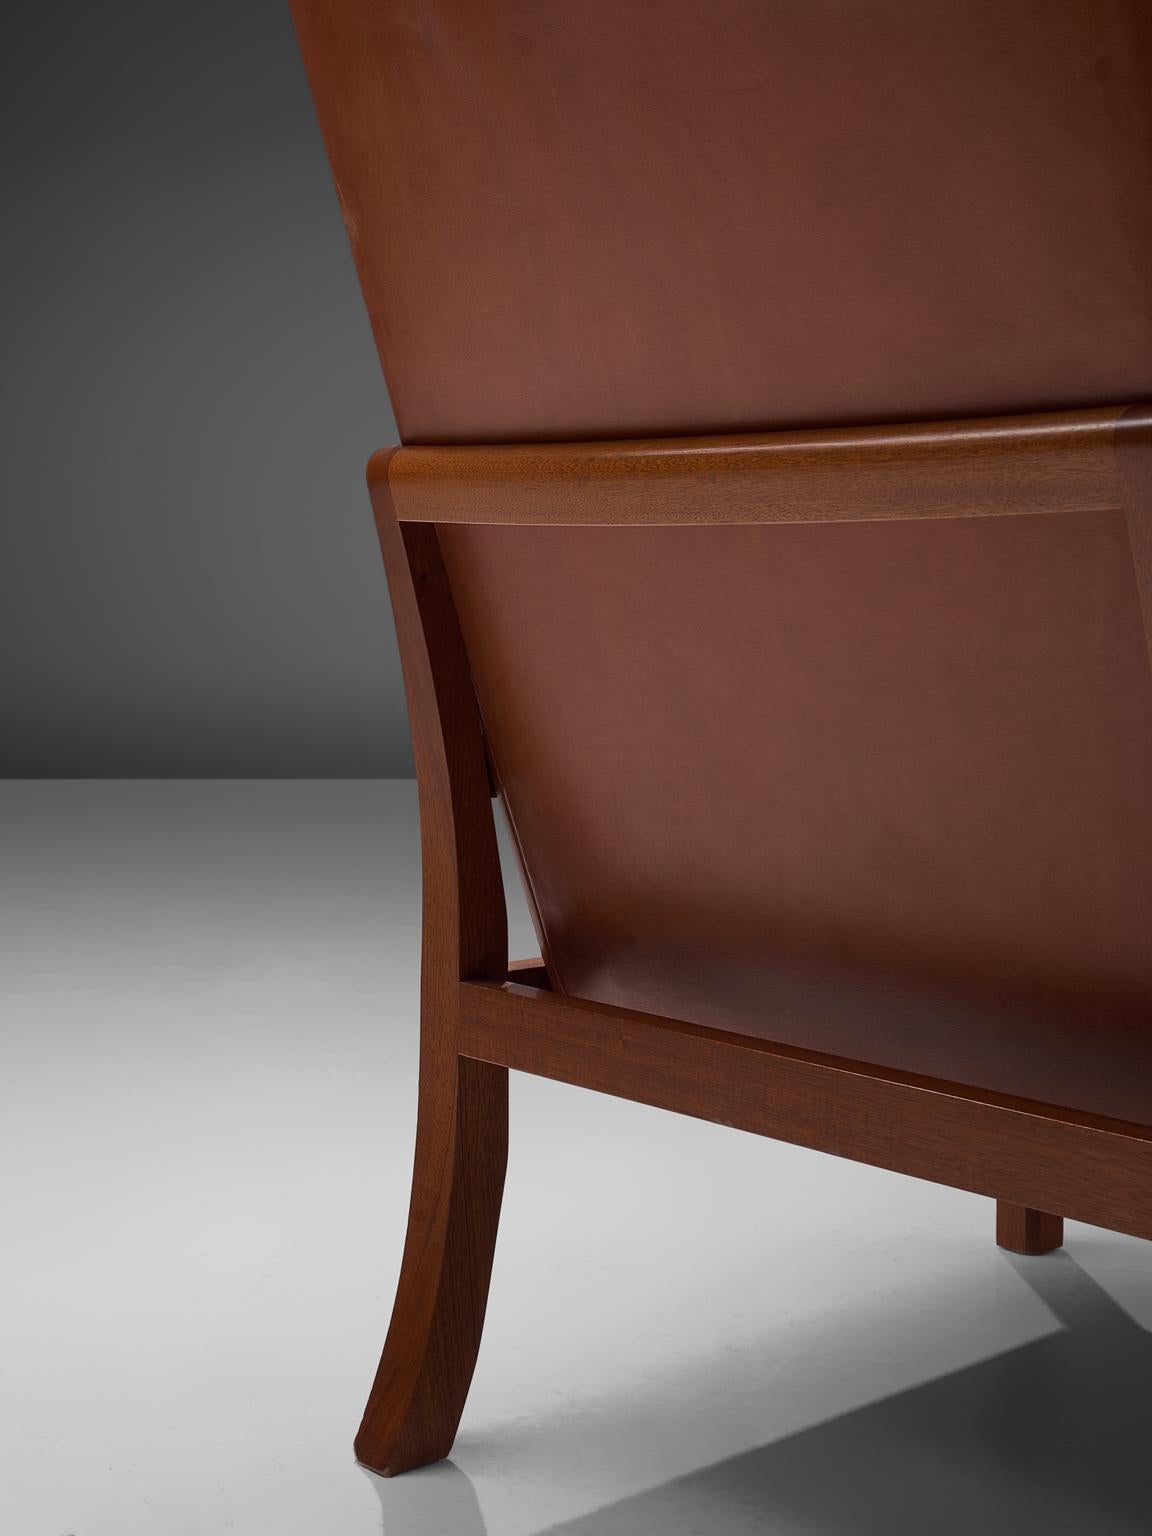 Mogens Koch Wingback Lounge Chair in Mahogany and Cognac Leather 1